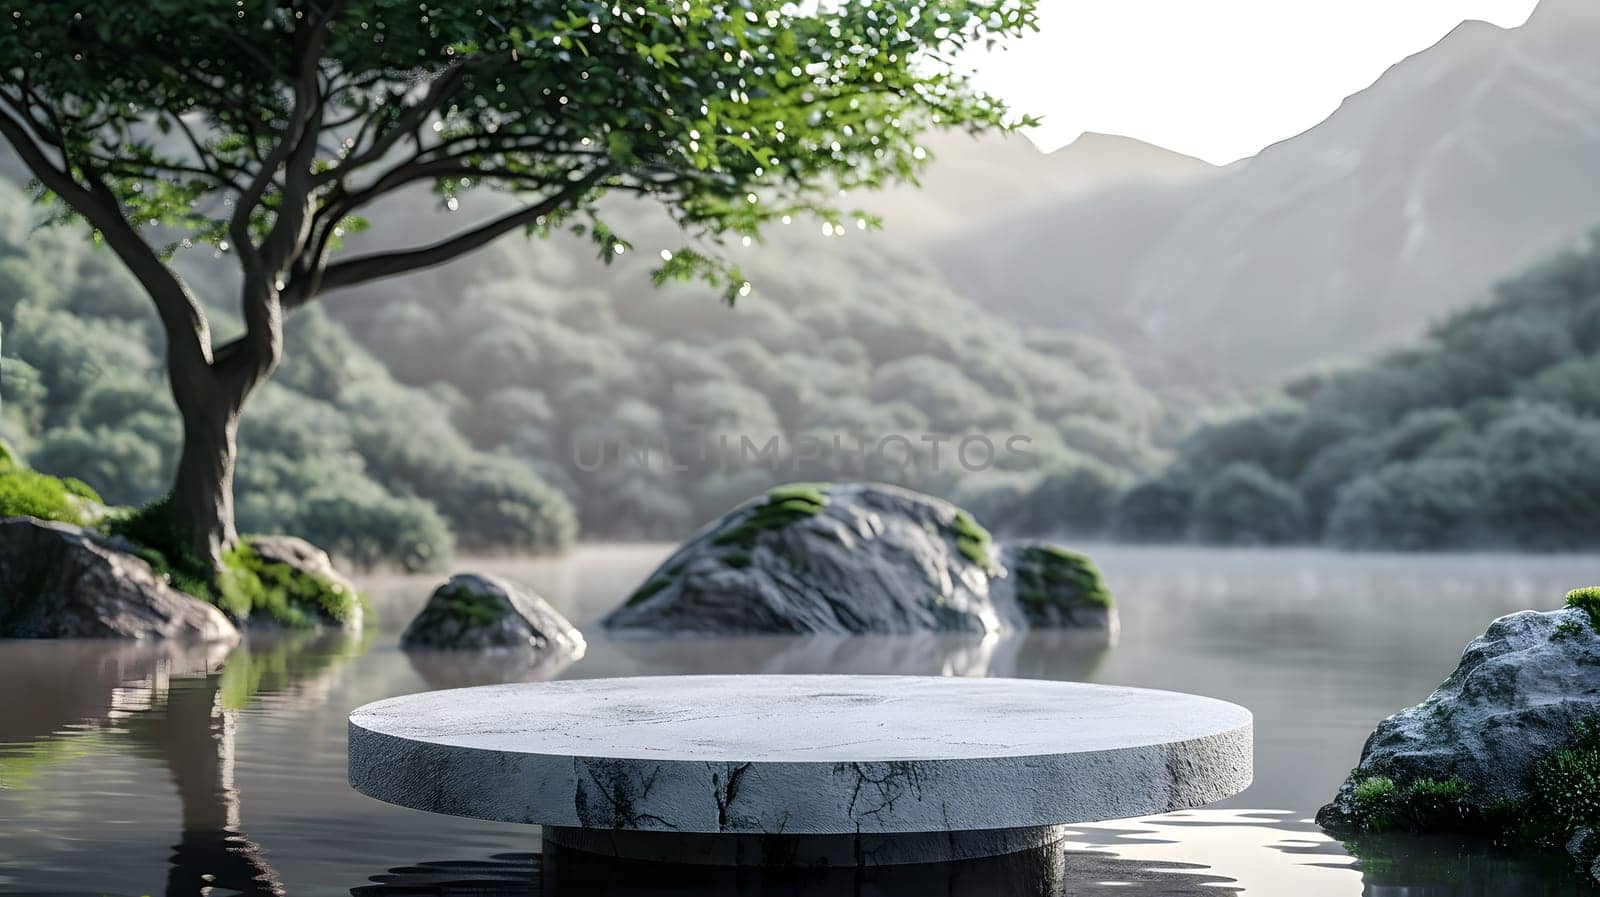 Marble table in lake with rocks, trees. Natural landscape by Nadtochiy